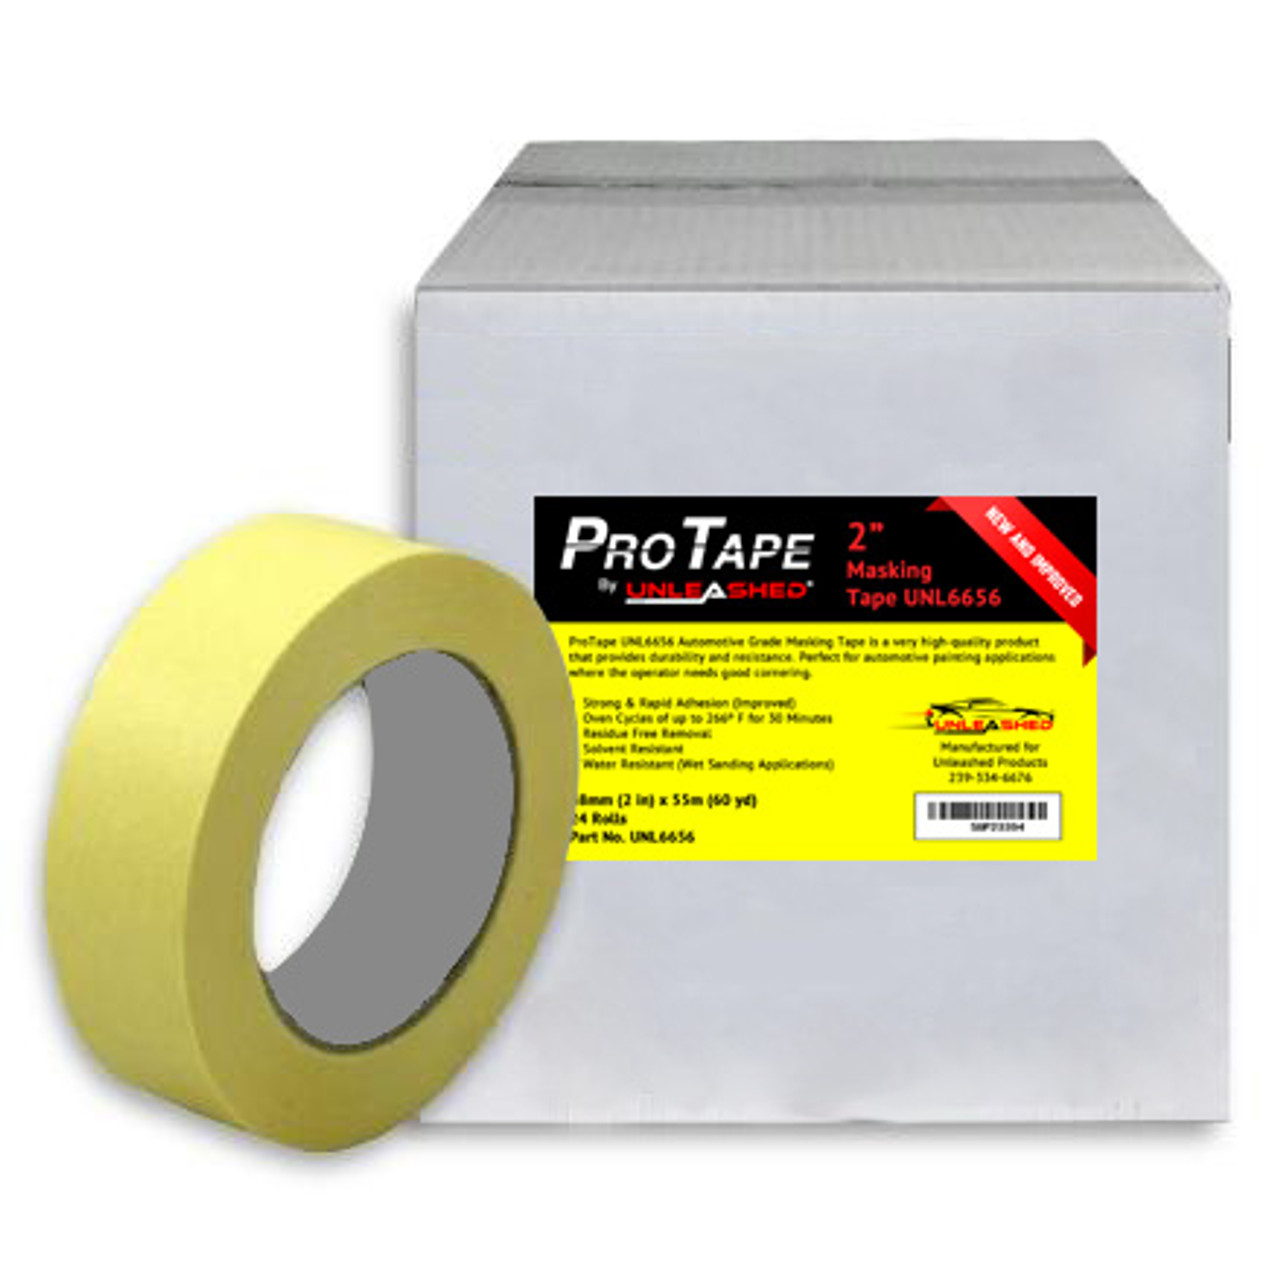 ProTape 6656 2 Masking Tape Yellow 48mm (2 Inch) x 55mm (60 Yards) 24/Case